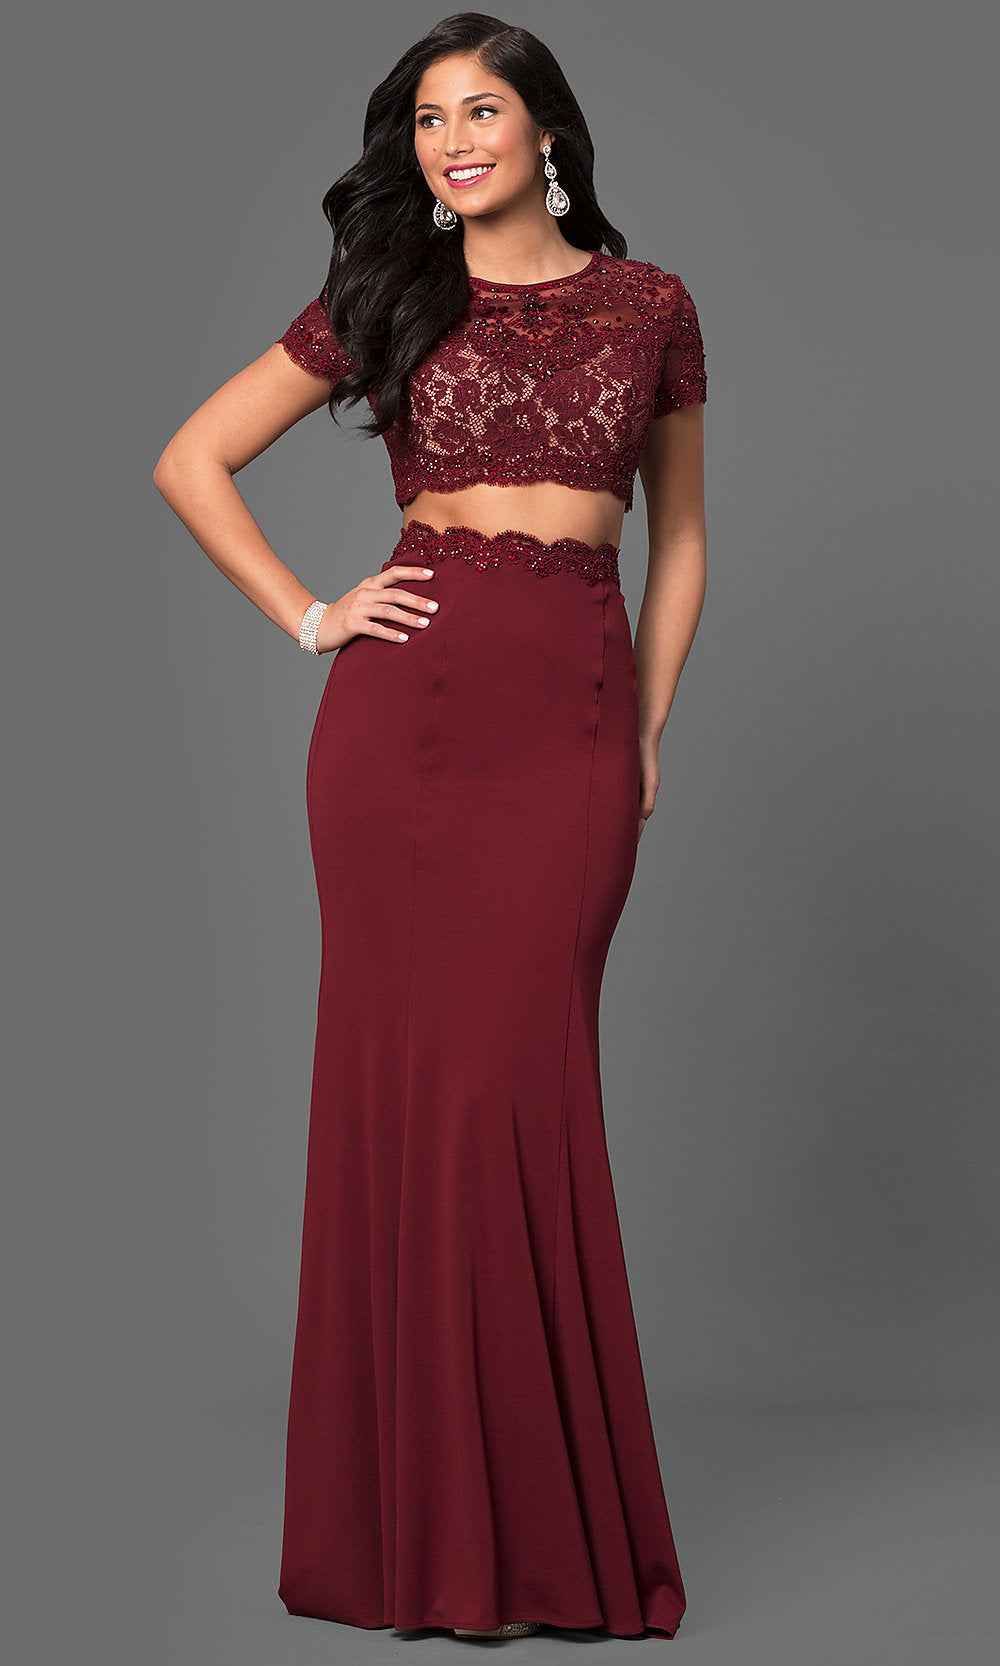 Burgundy Two-Piece Prom Dress with Short-Sleeve Crop Top